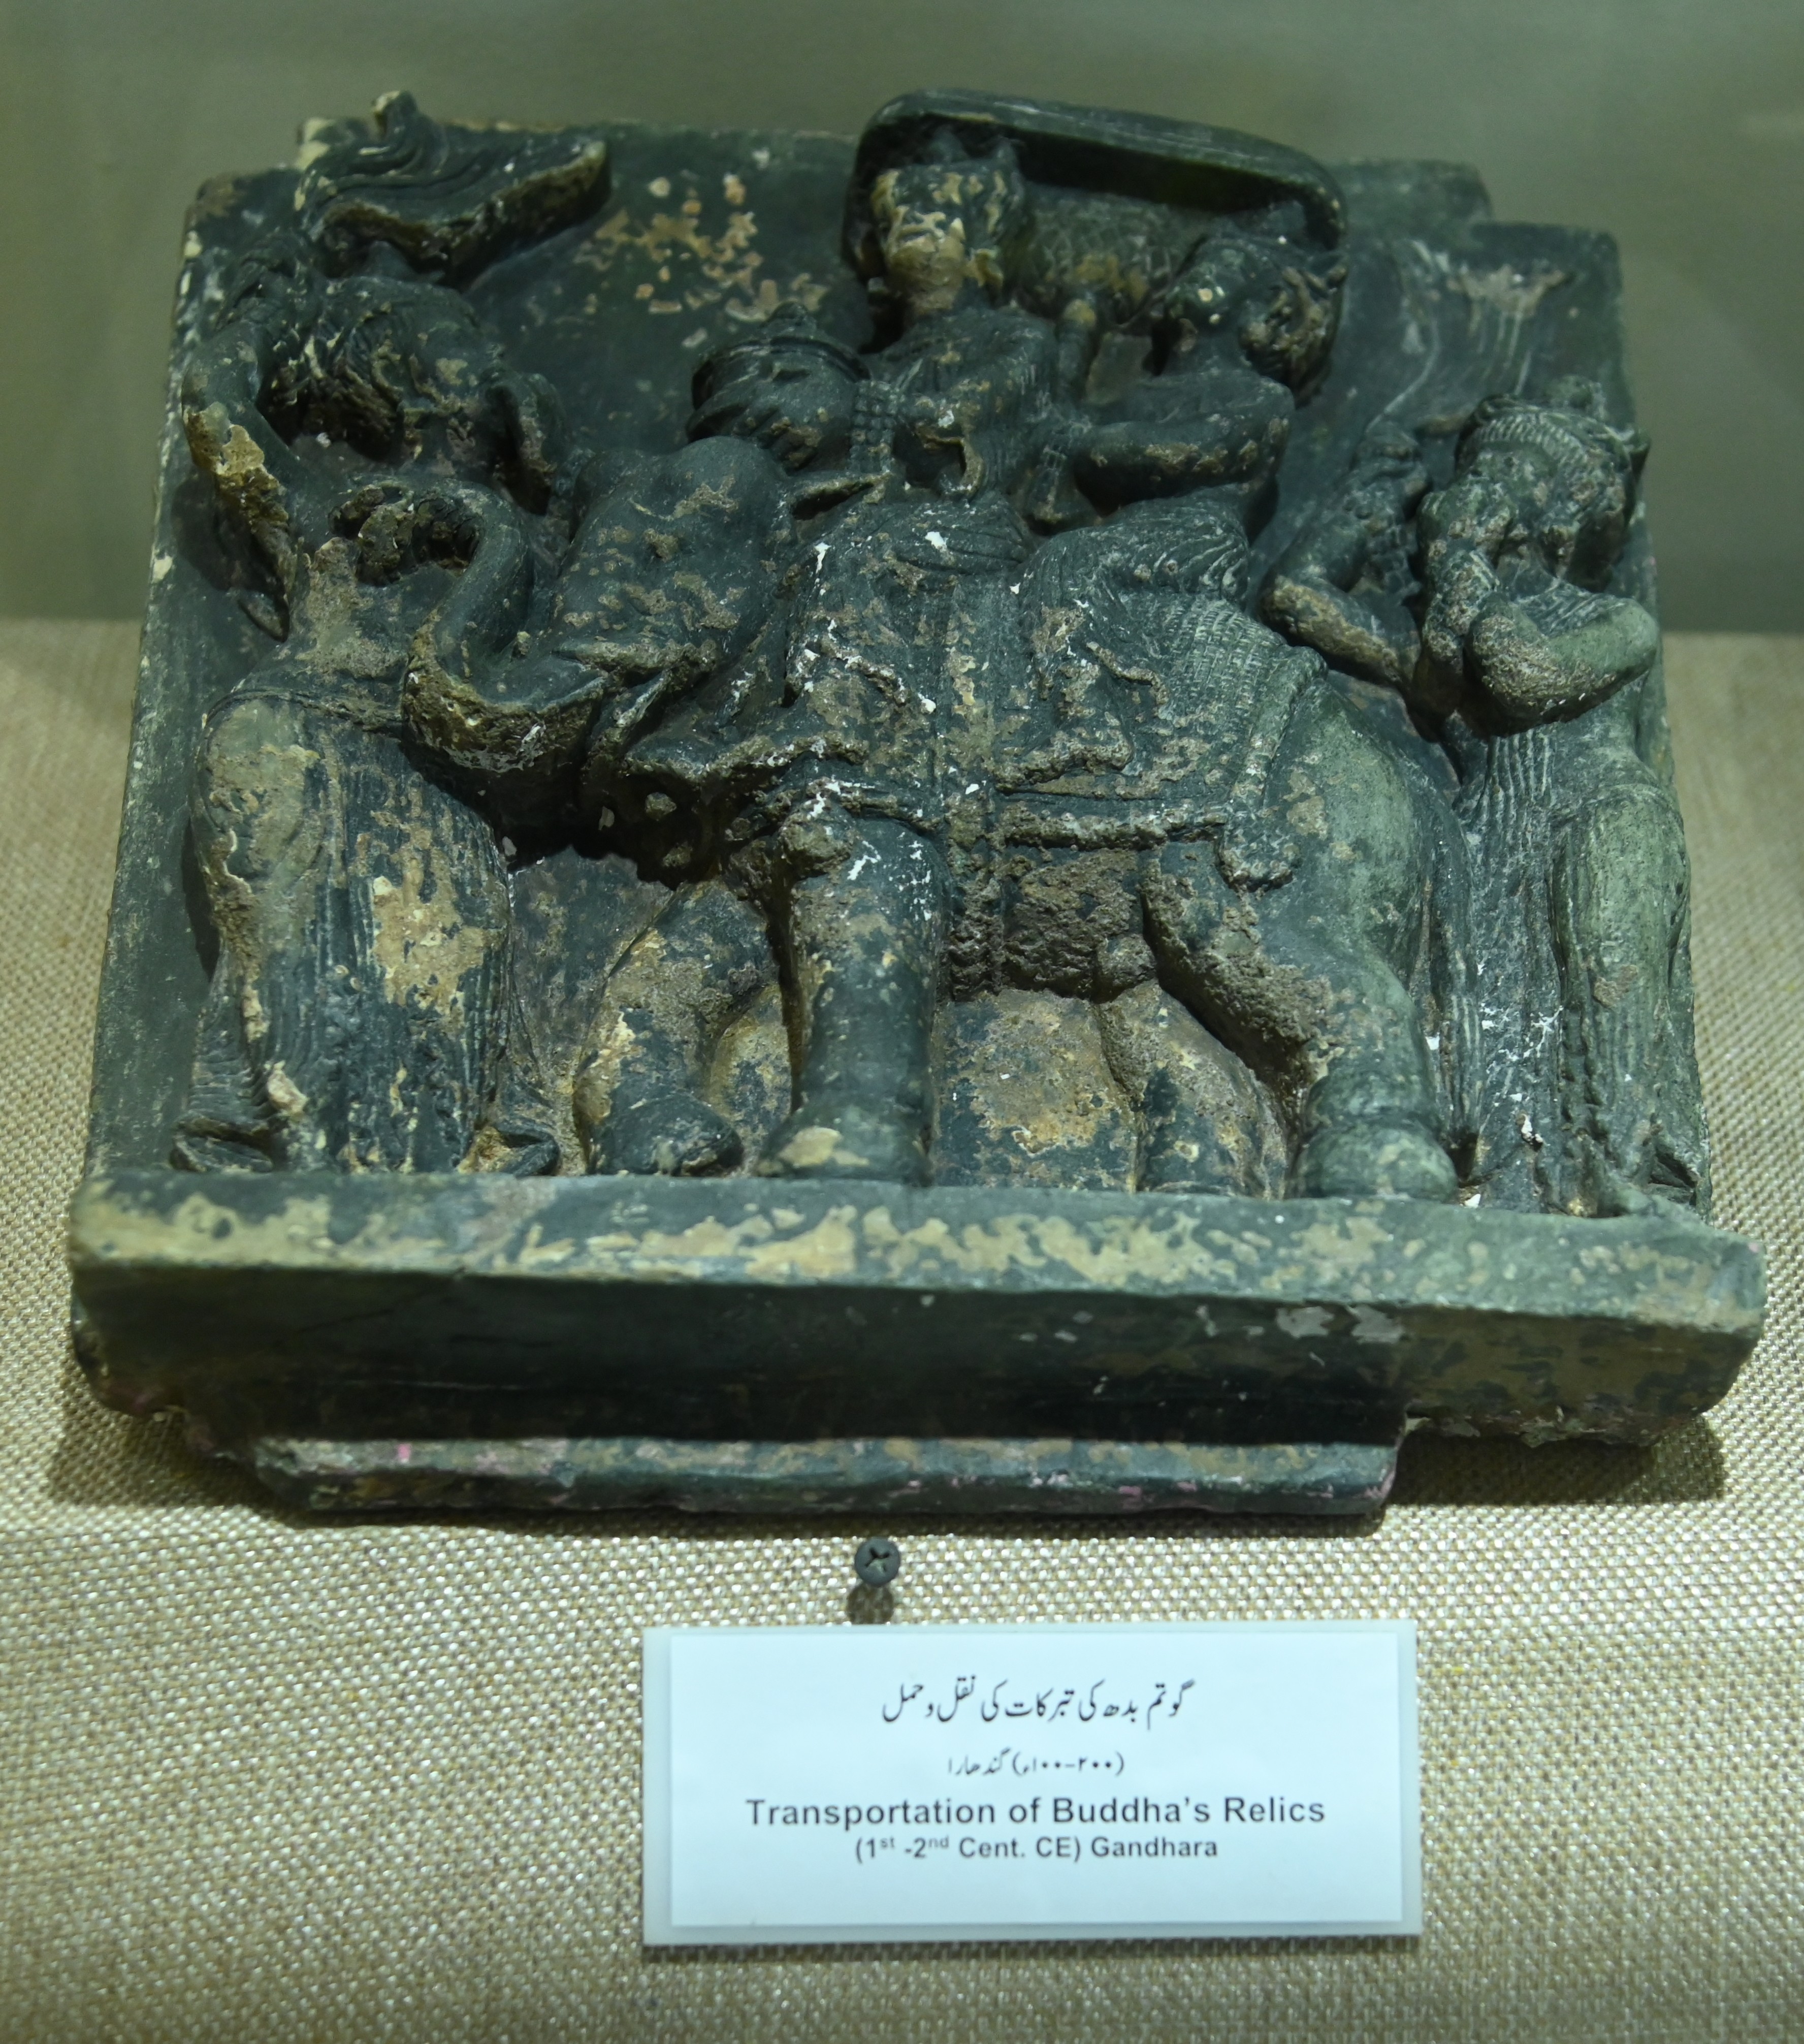 The Artifact depicting the transportation of Buddha's Relics